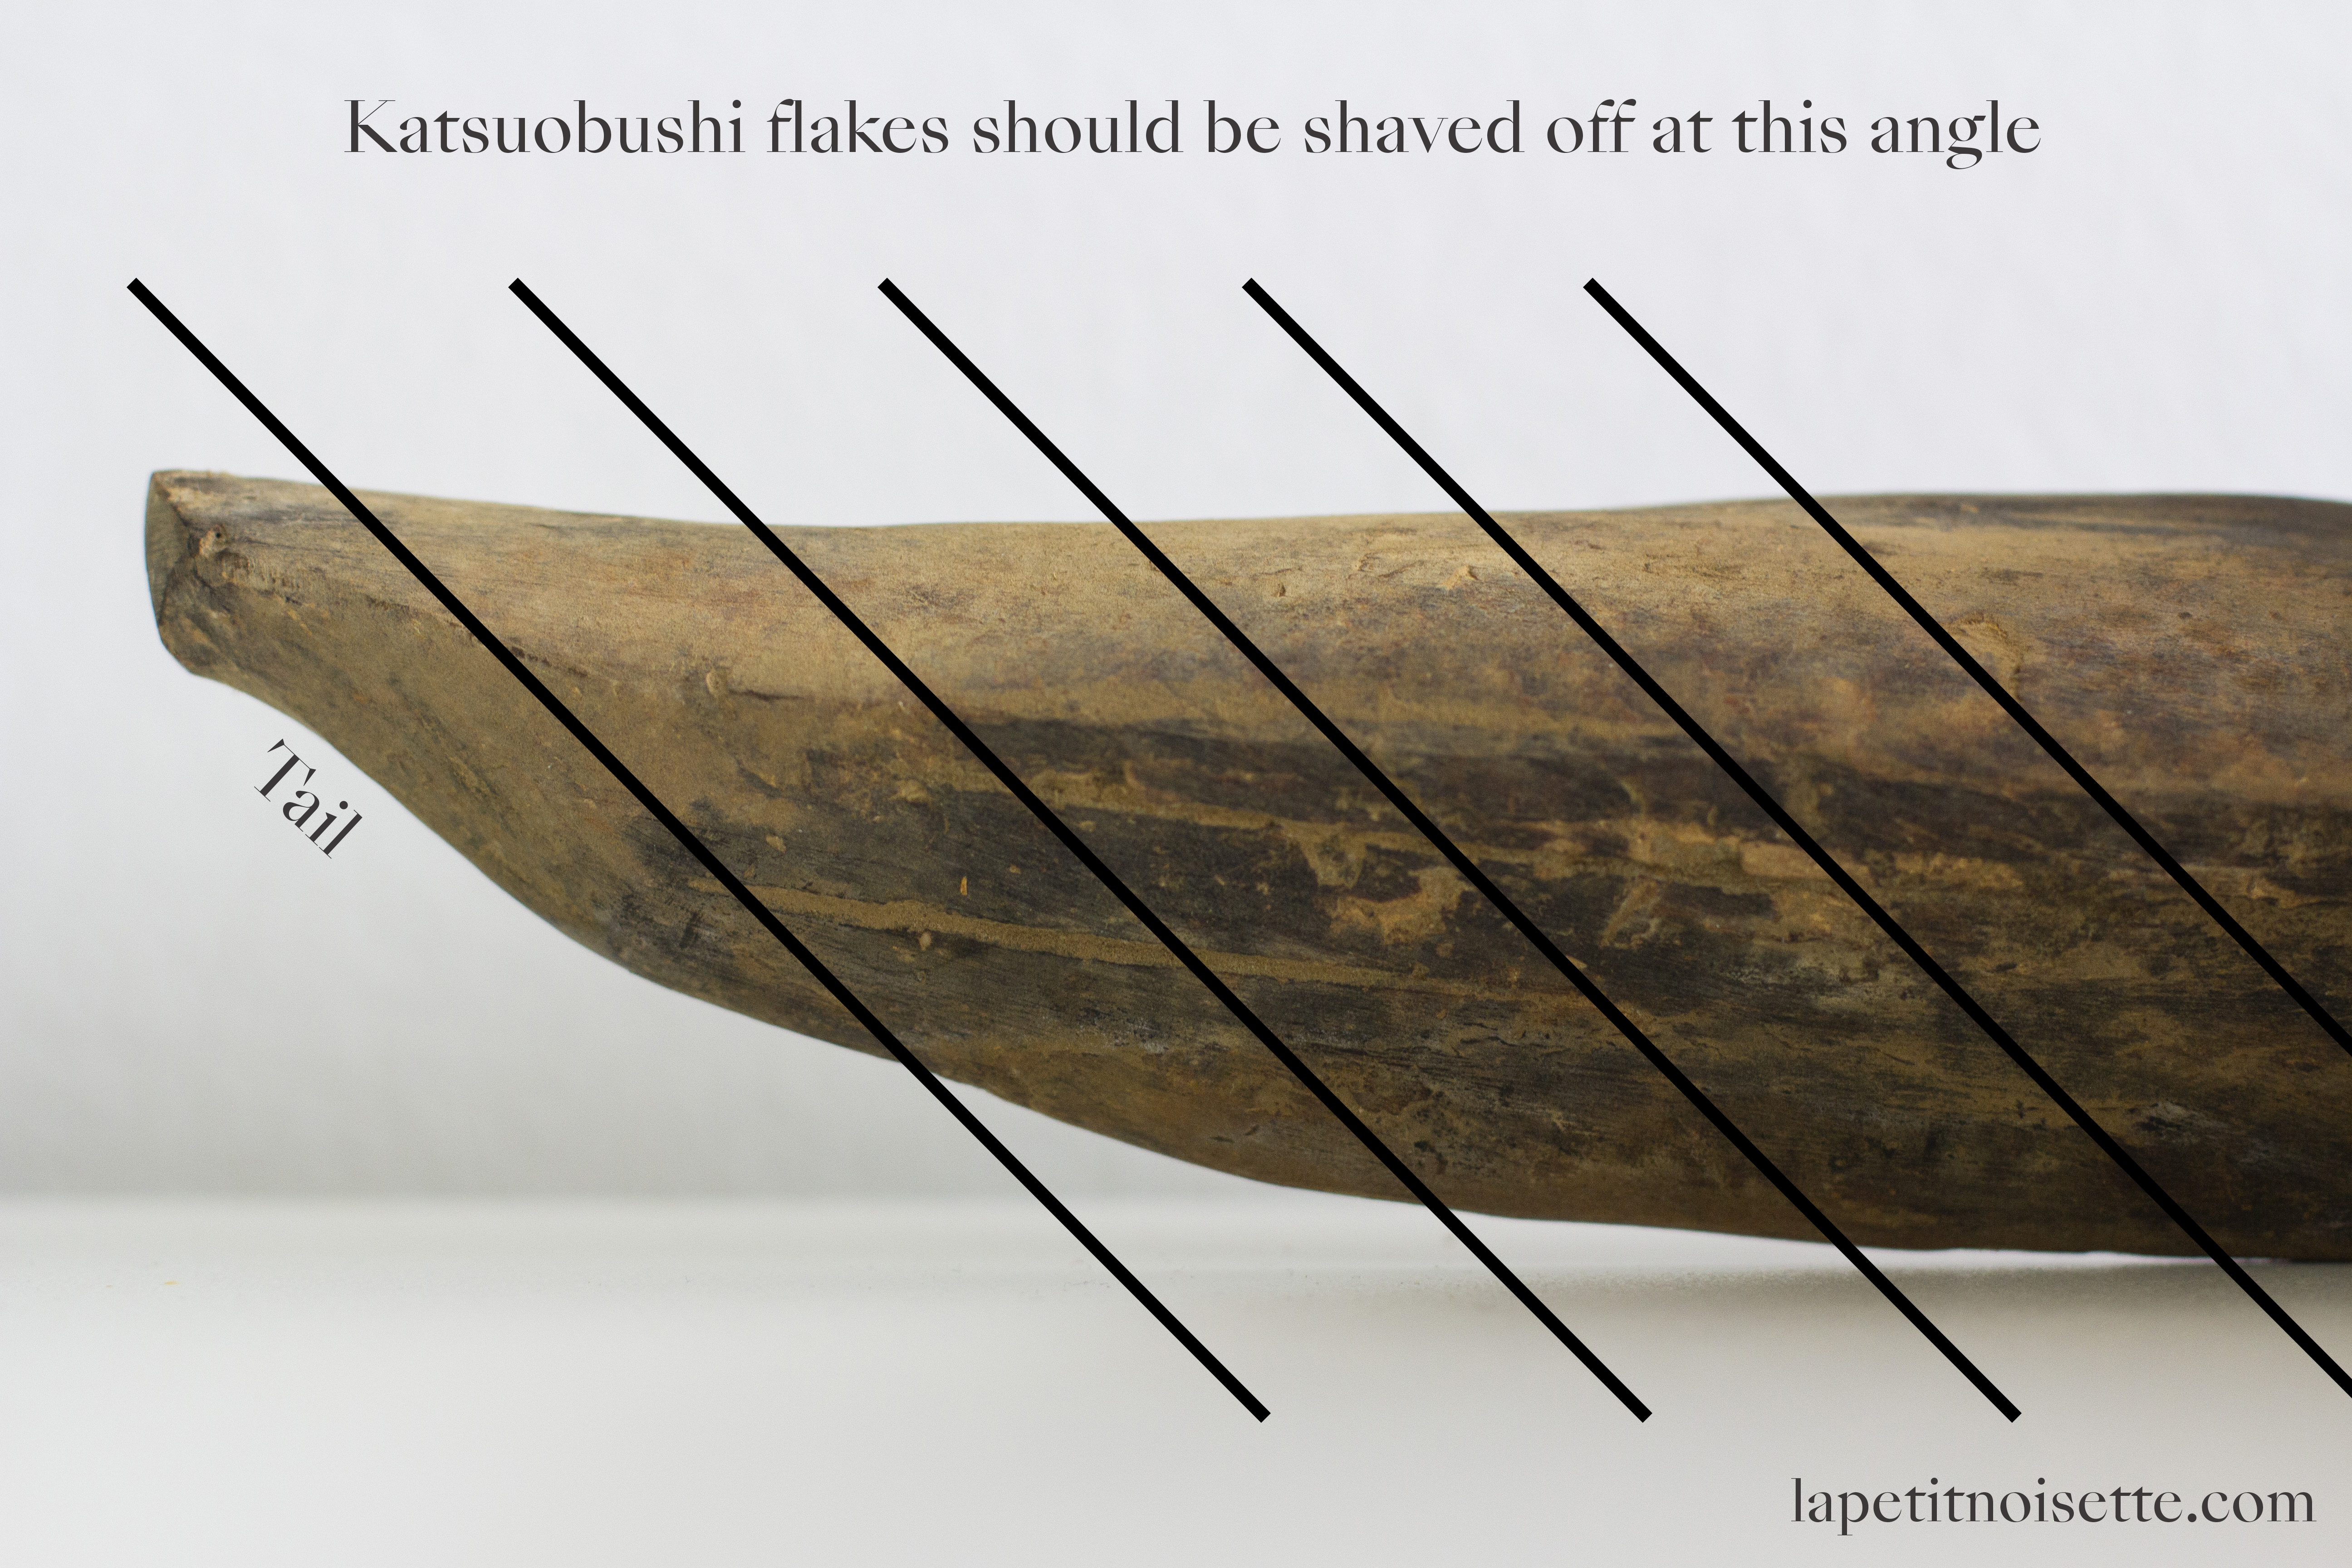 The angle at which the dorsal fillets of a katsuobushi should be shaved